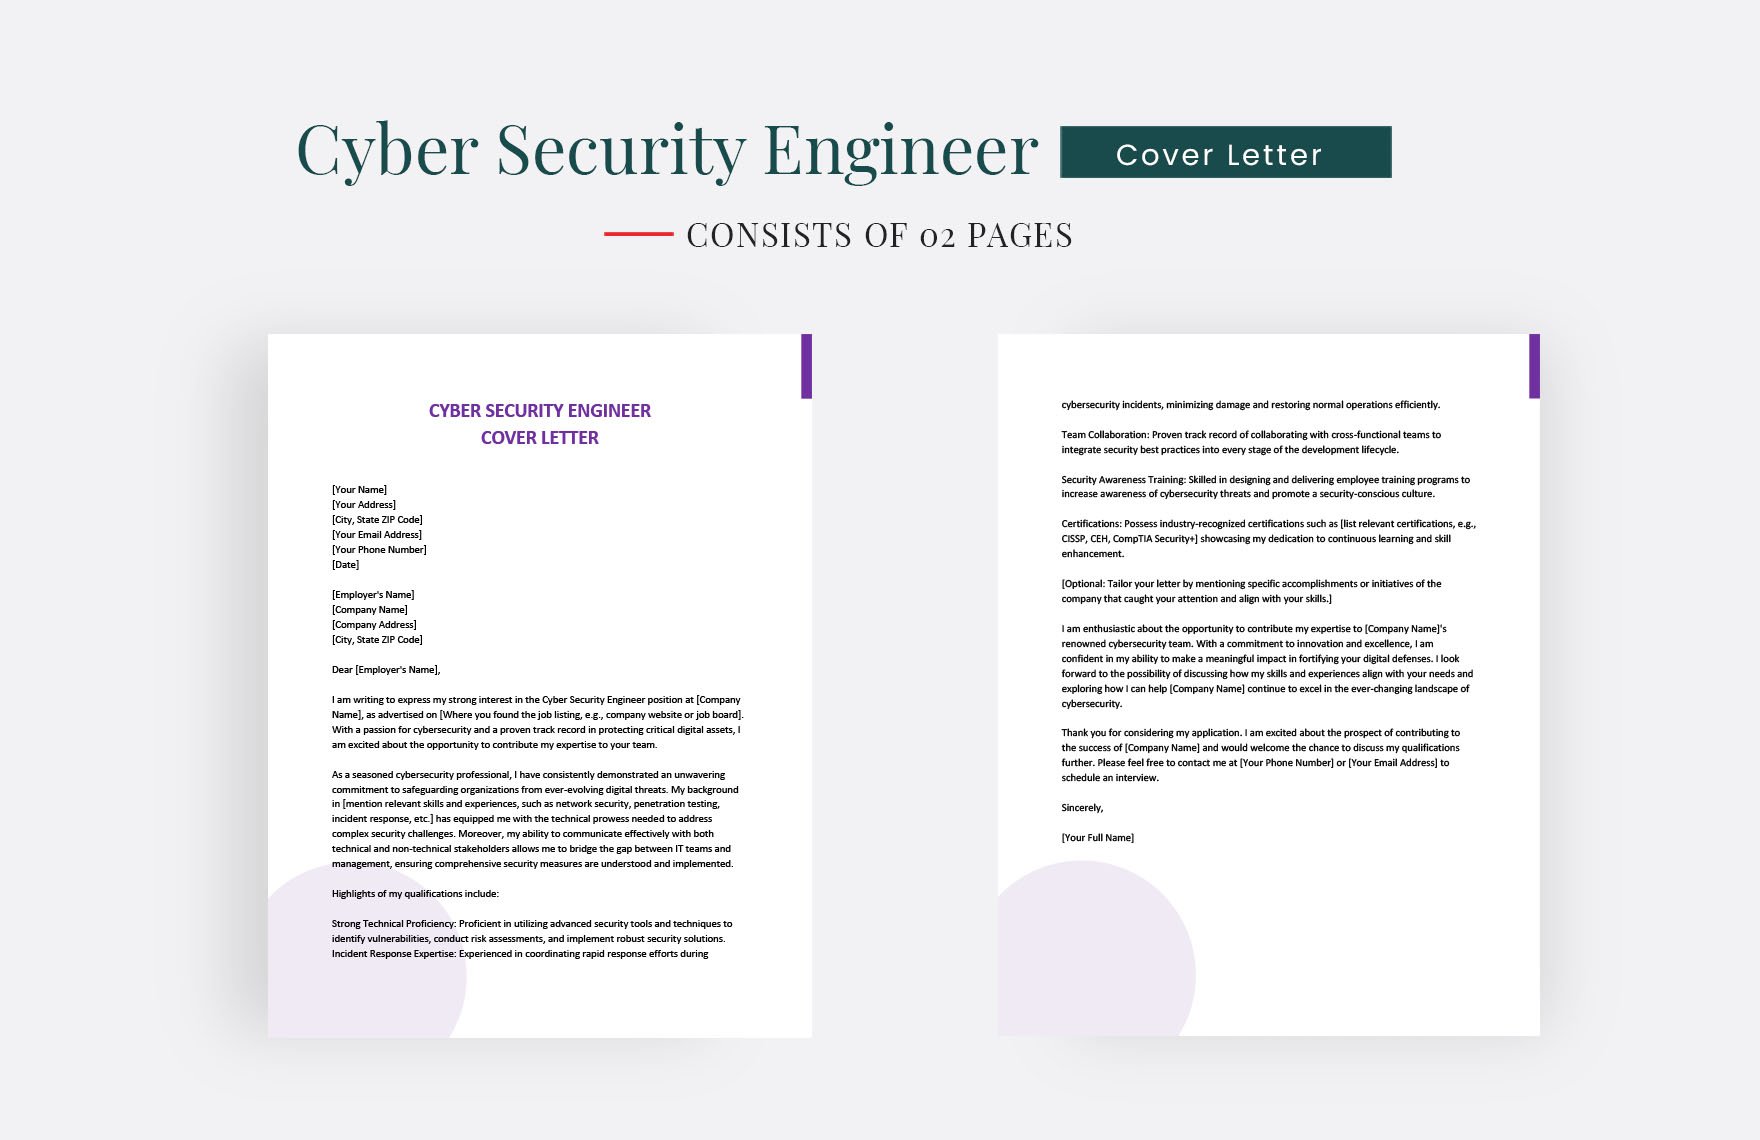 Cyber Security Engineer Cover Letter in Word, Google Docs